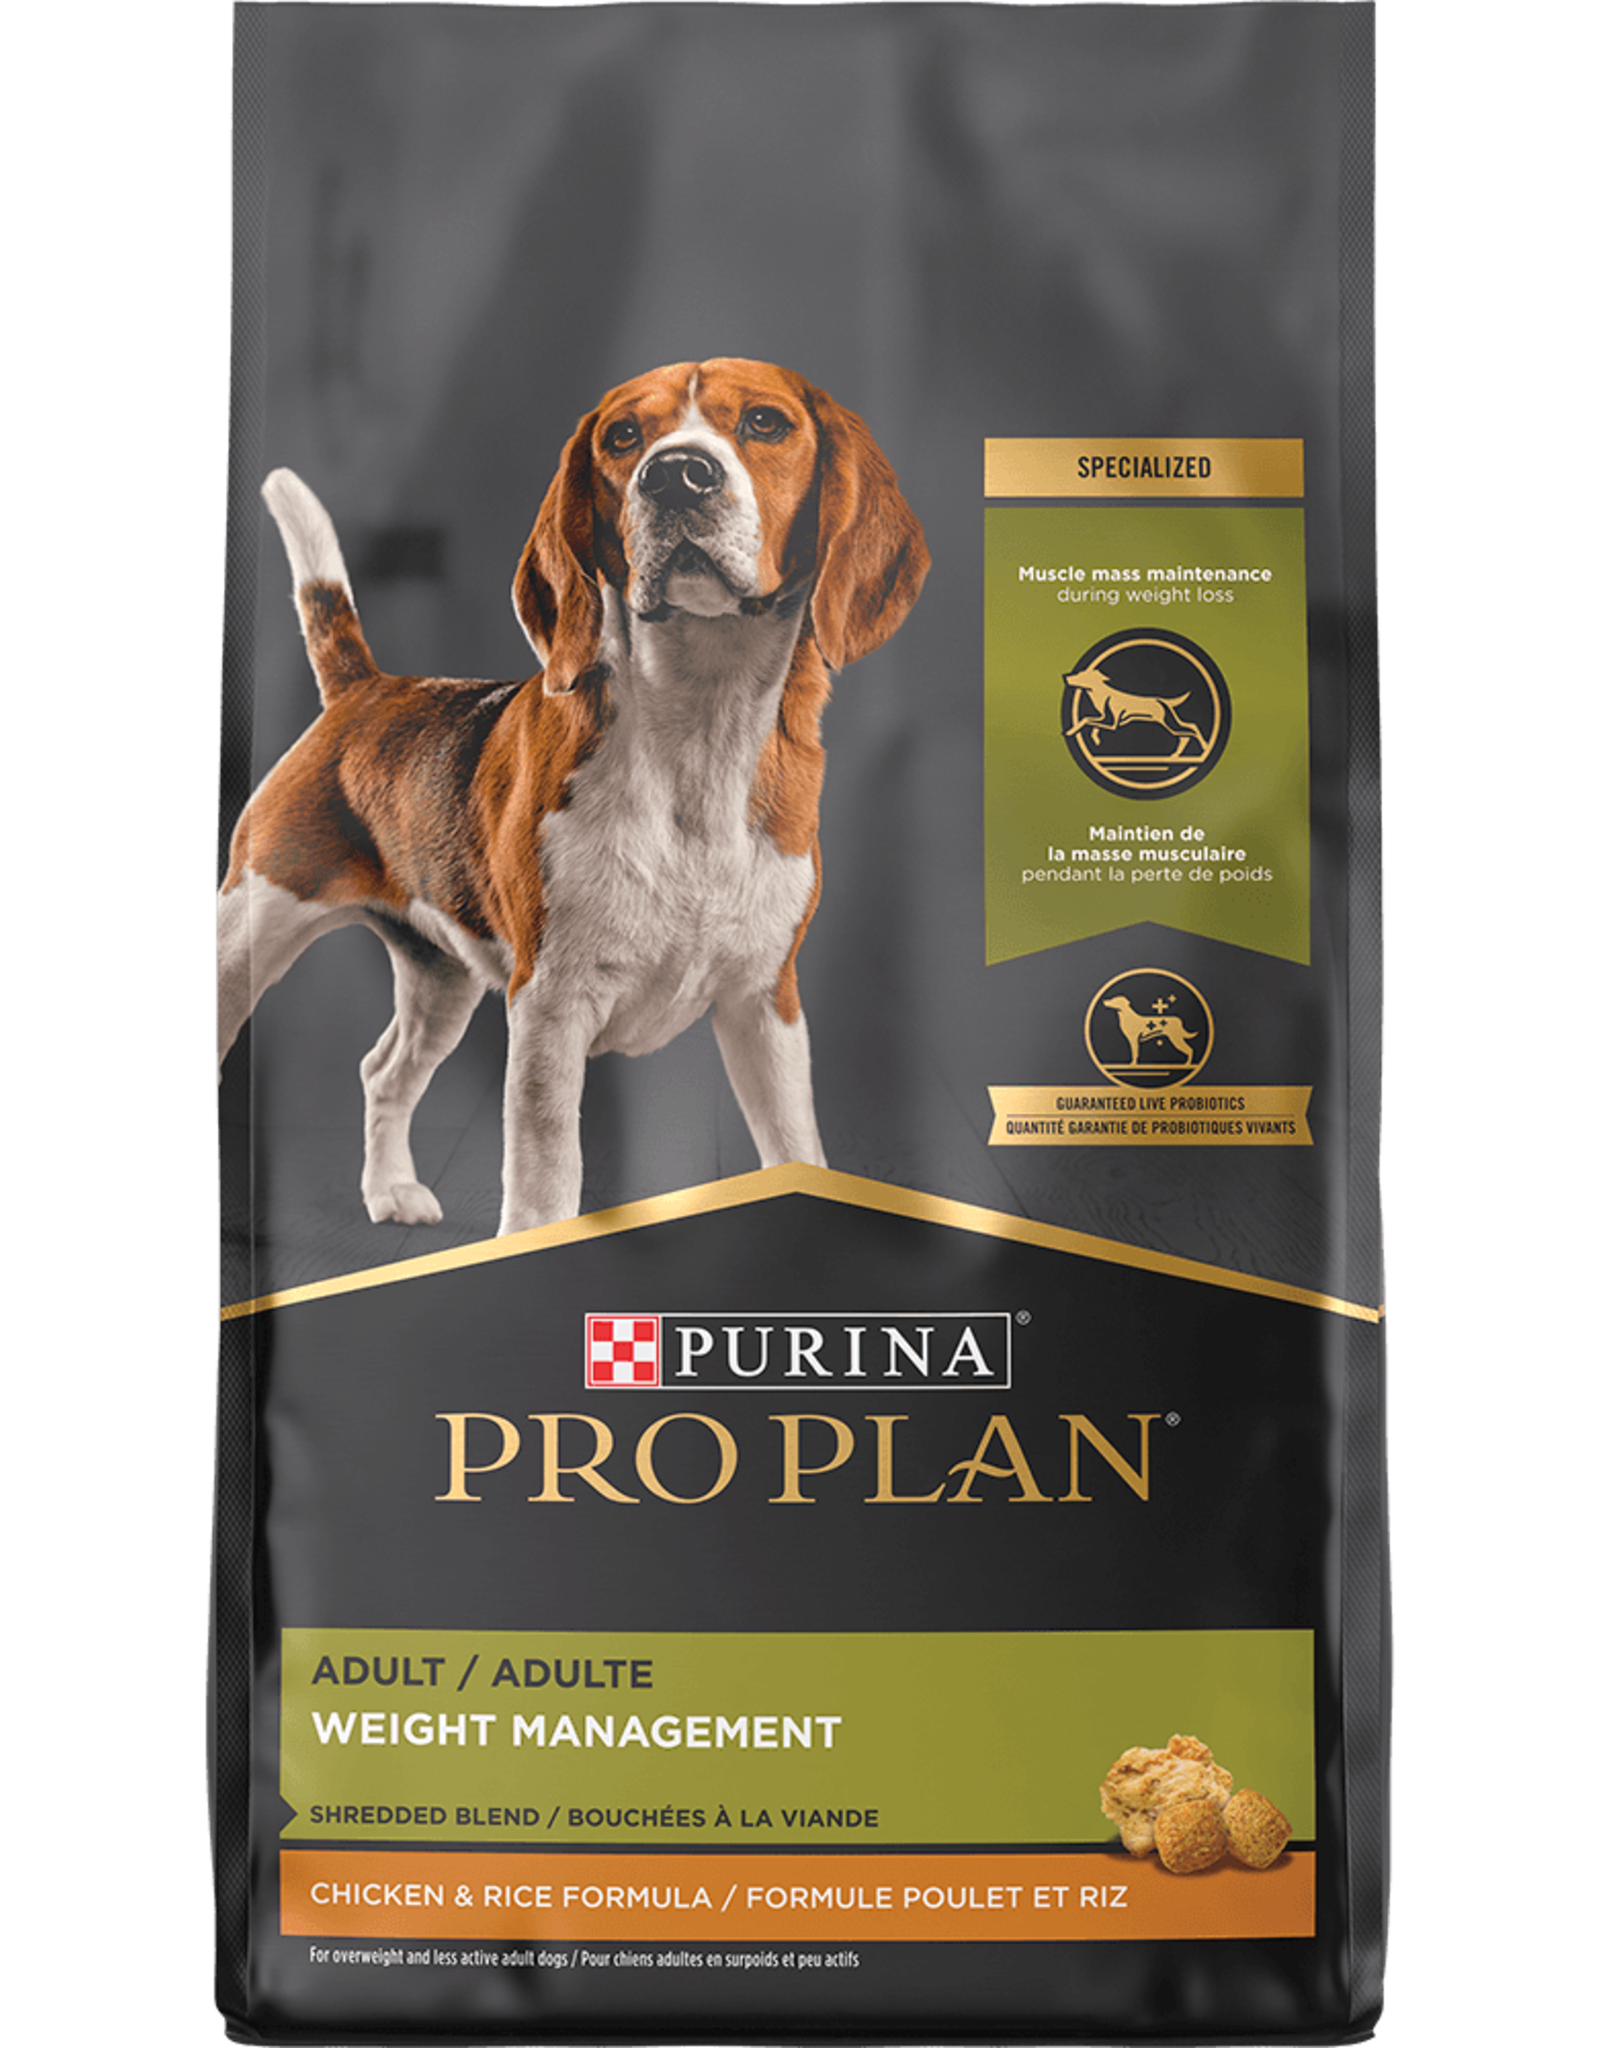 NESTLE PURINA PETCARE PRO PLAN DOG SHREDDED WEIGHT MANAGEMENT 34LBS